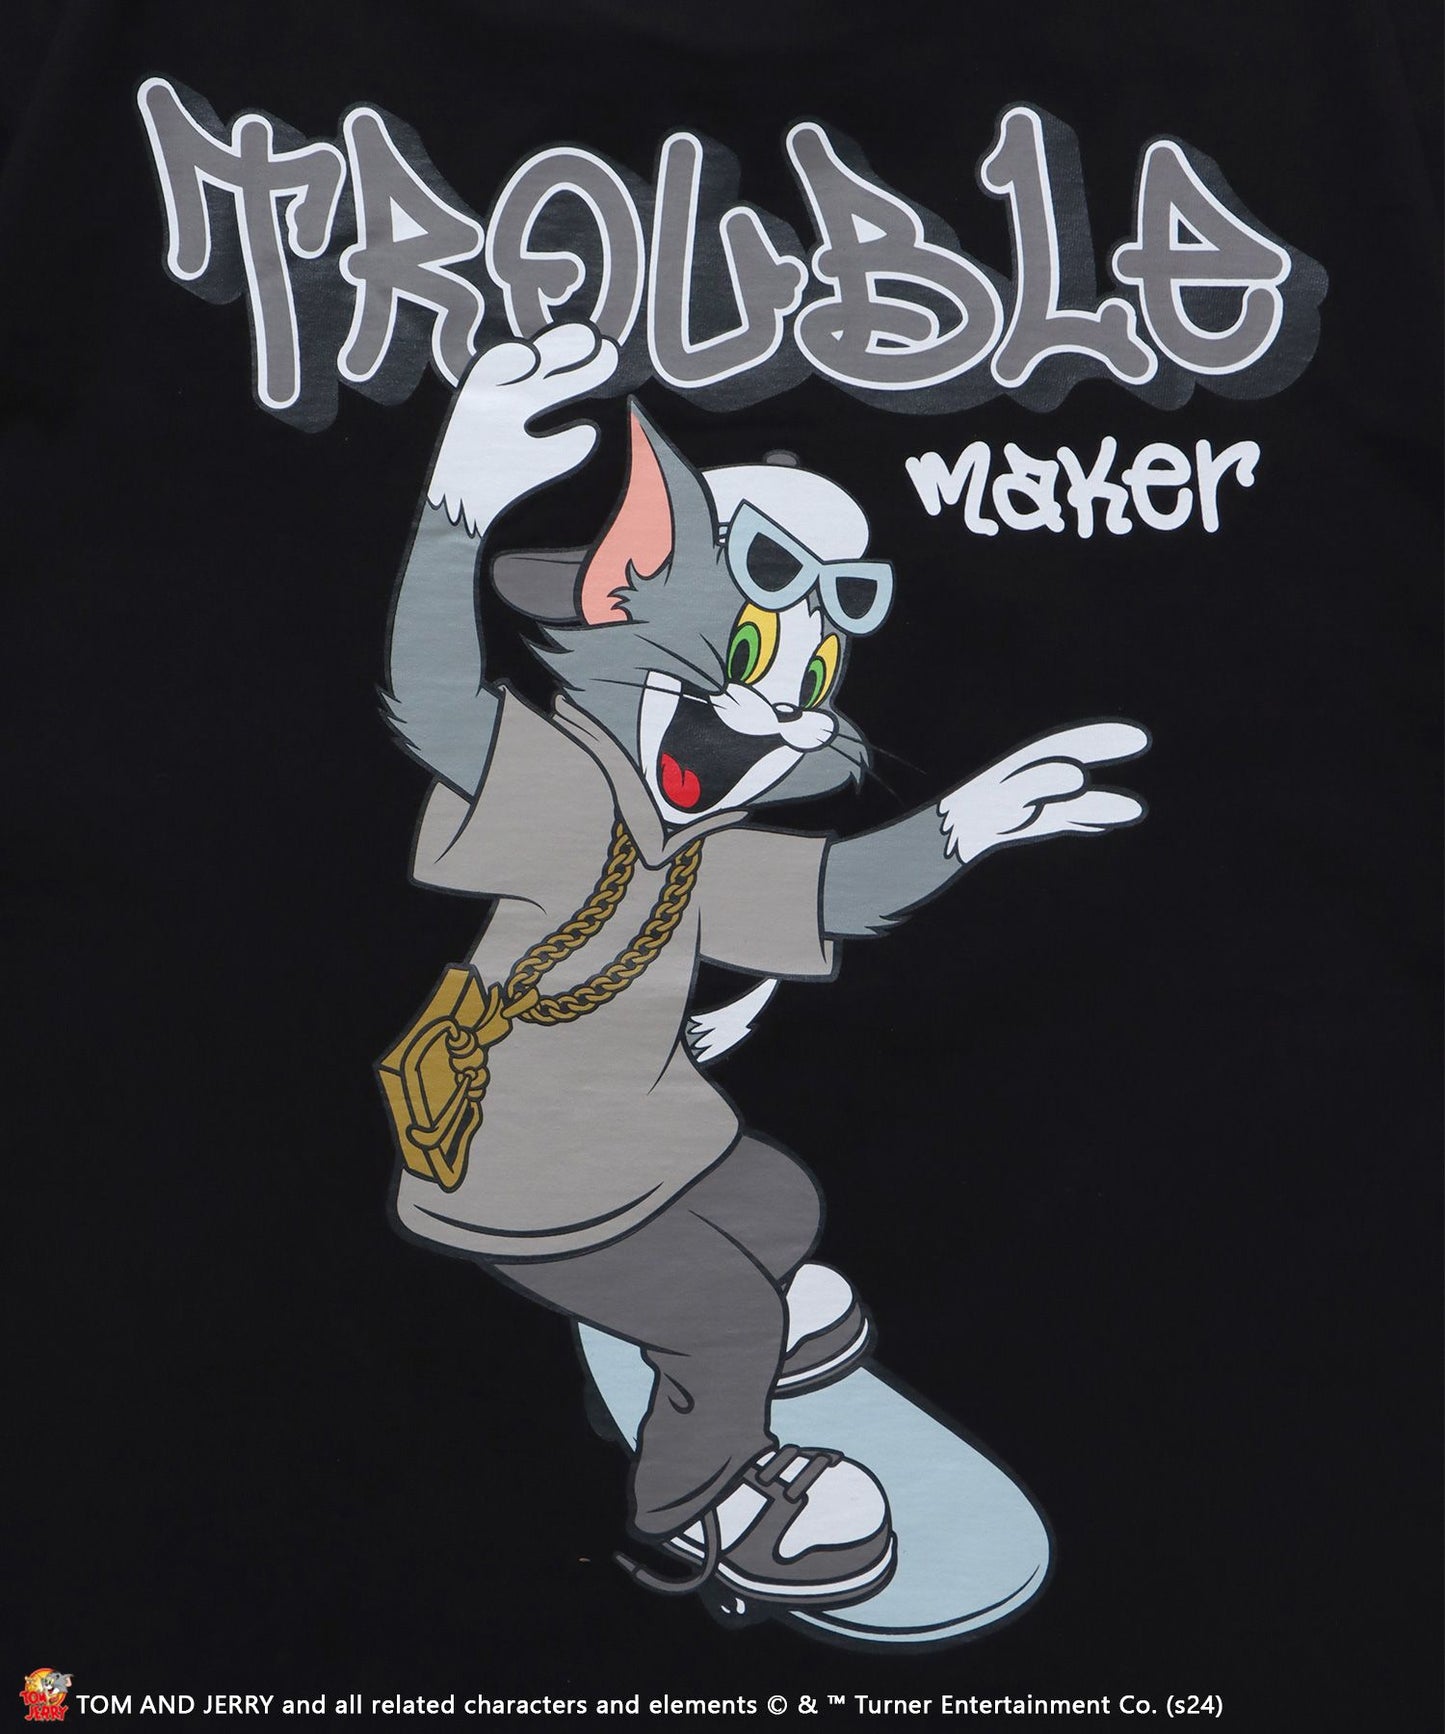 TJ 90s SK8 S/S TEE / TOM and JERRY トムジェリ スケート Tシャツ グラフィティ プリント 半袖 ブラック